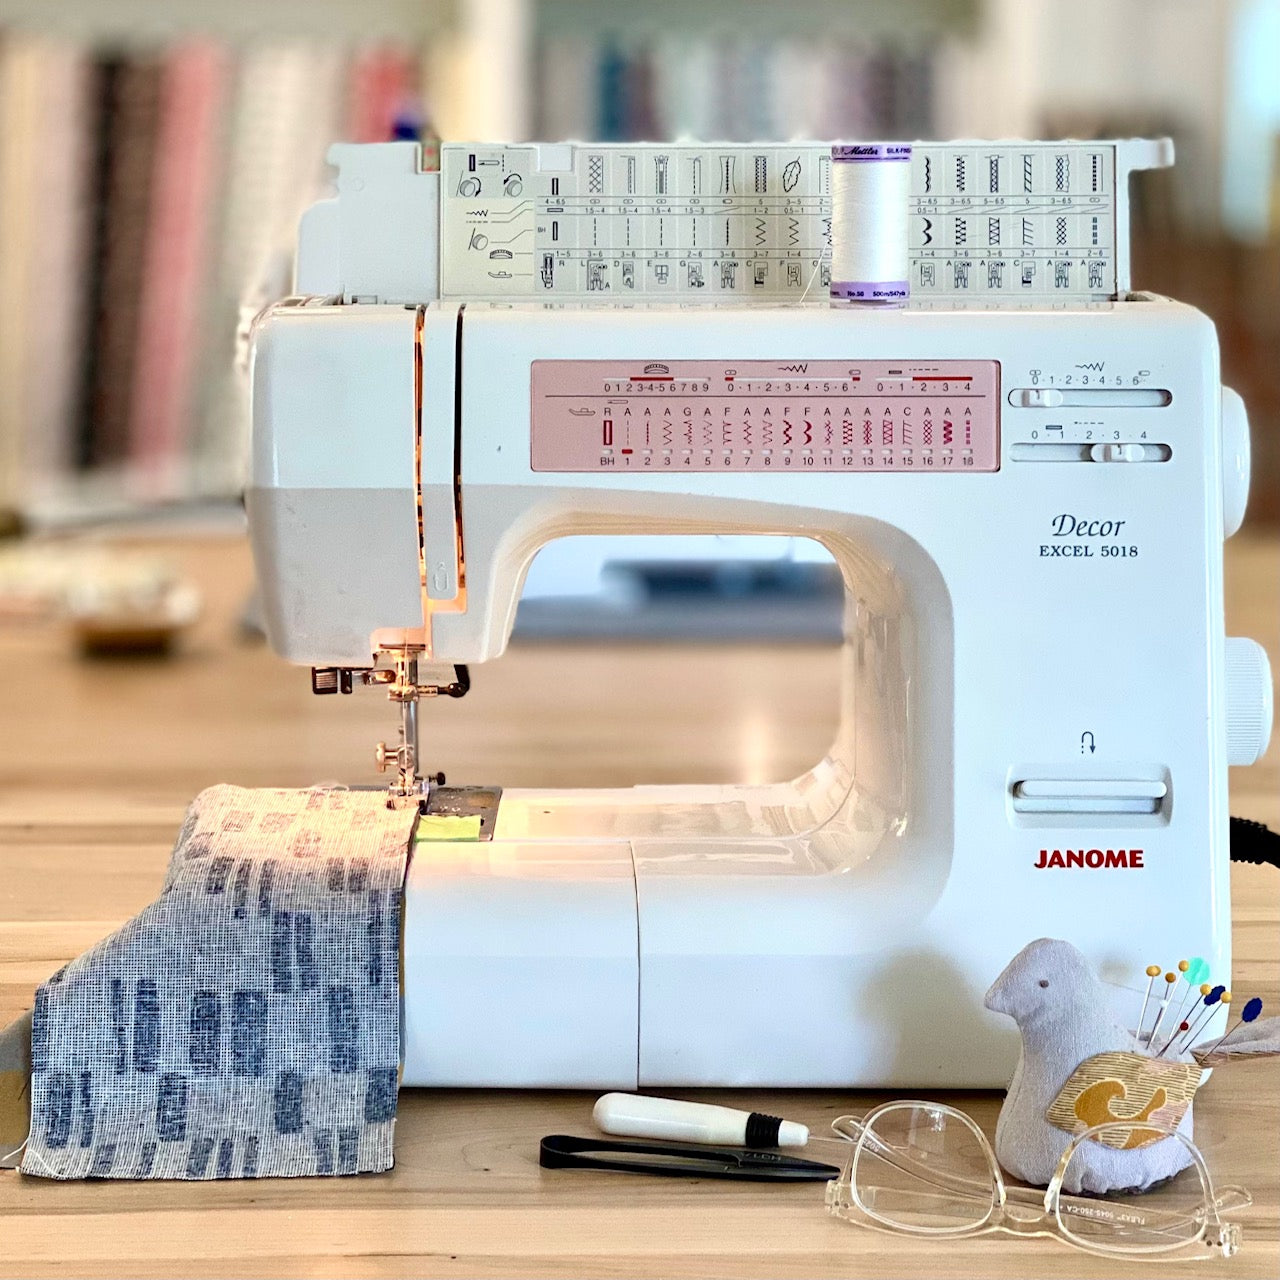 Sewing Machine Basics & Learn to Sew Series for KIDS 10-12 yrs, Begins Tuesday April 4th, 6:15pm